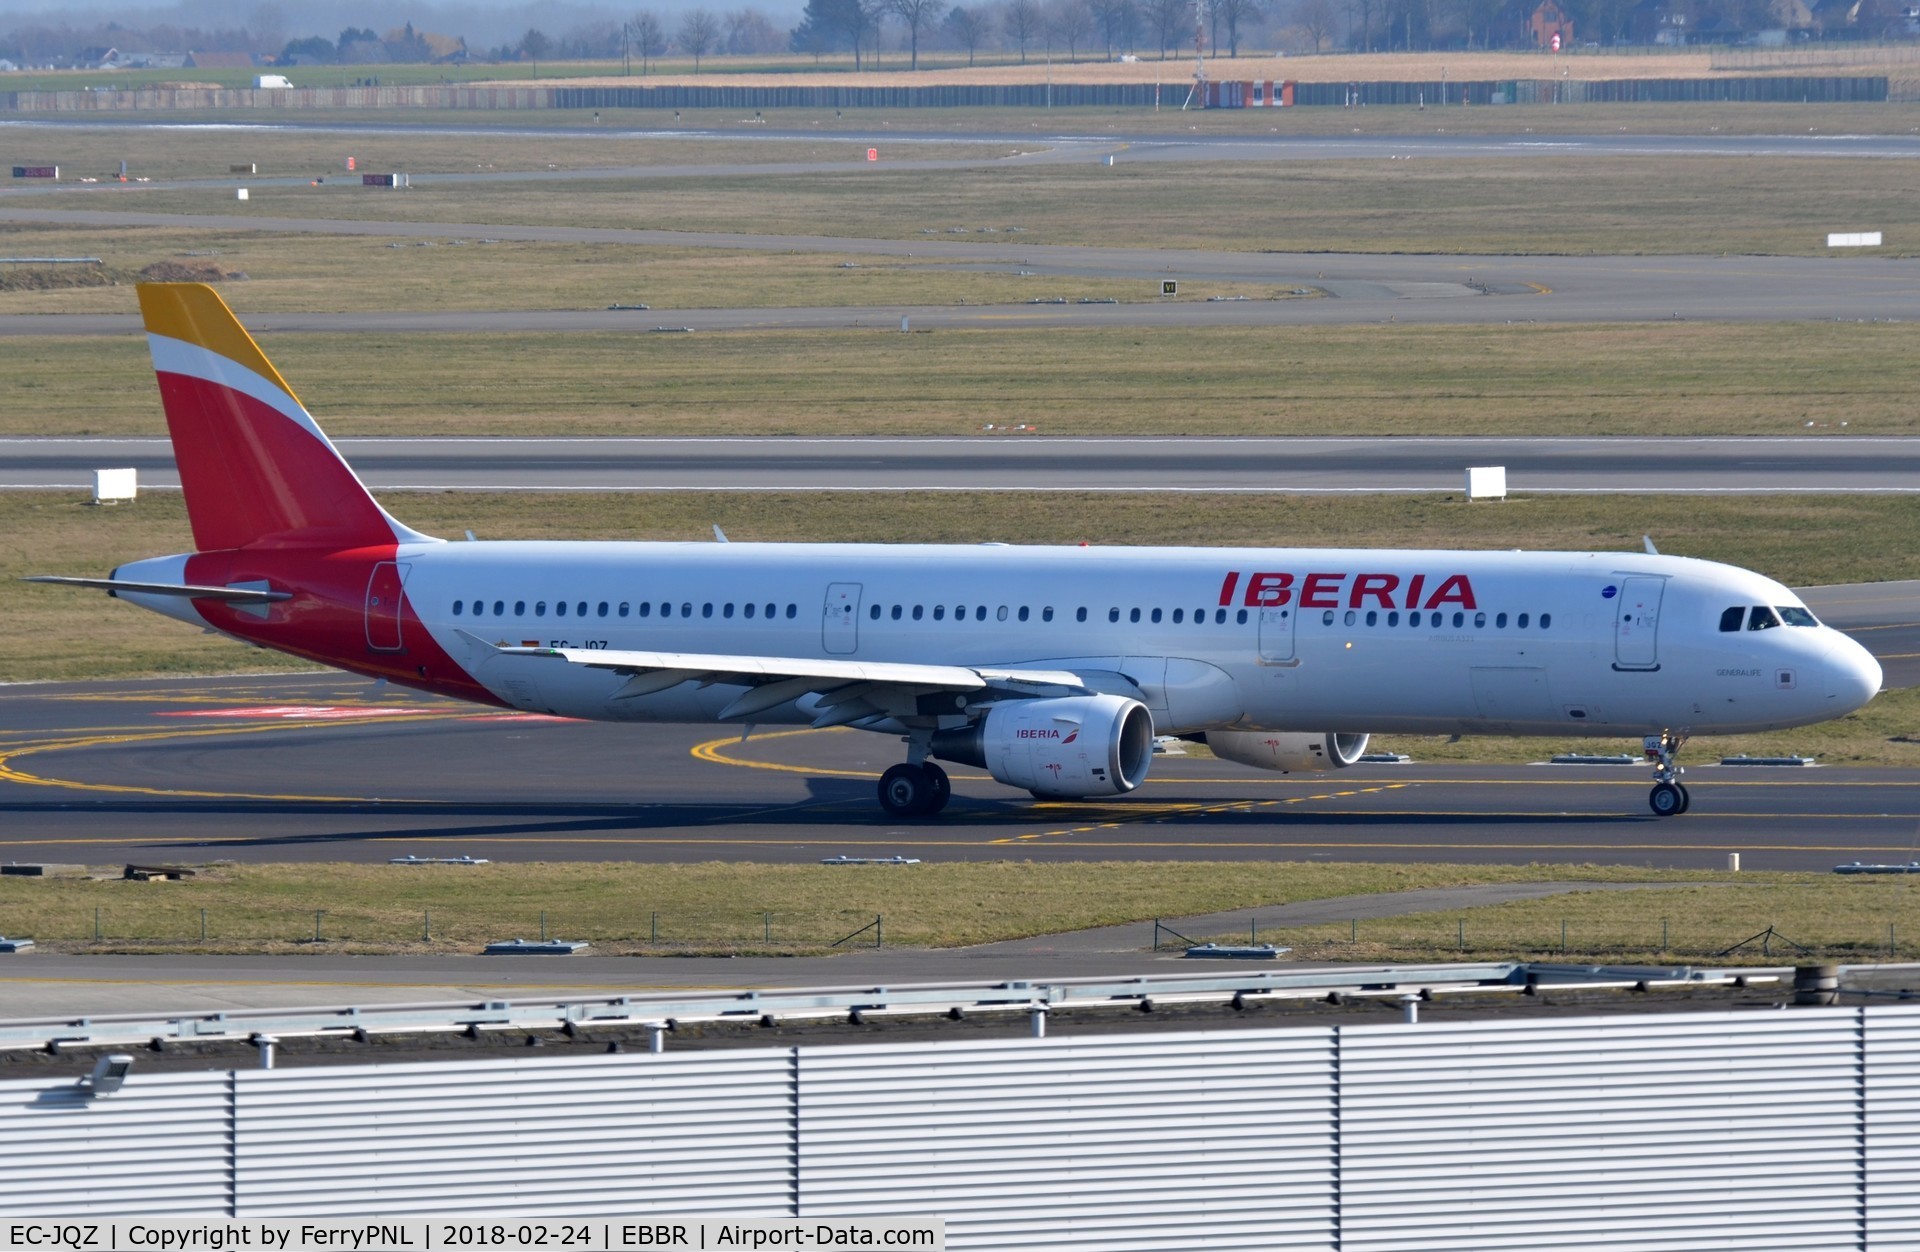 EC-JQZ, 2006 Airbus A321-211 C/N 2736, Iberia A321 on its way for take-off